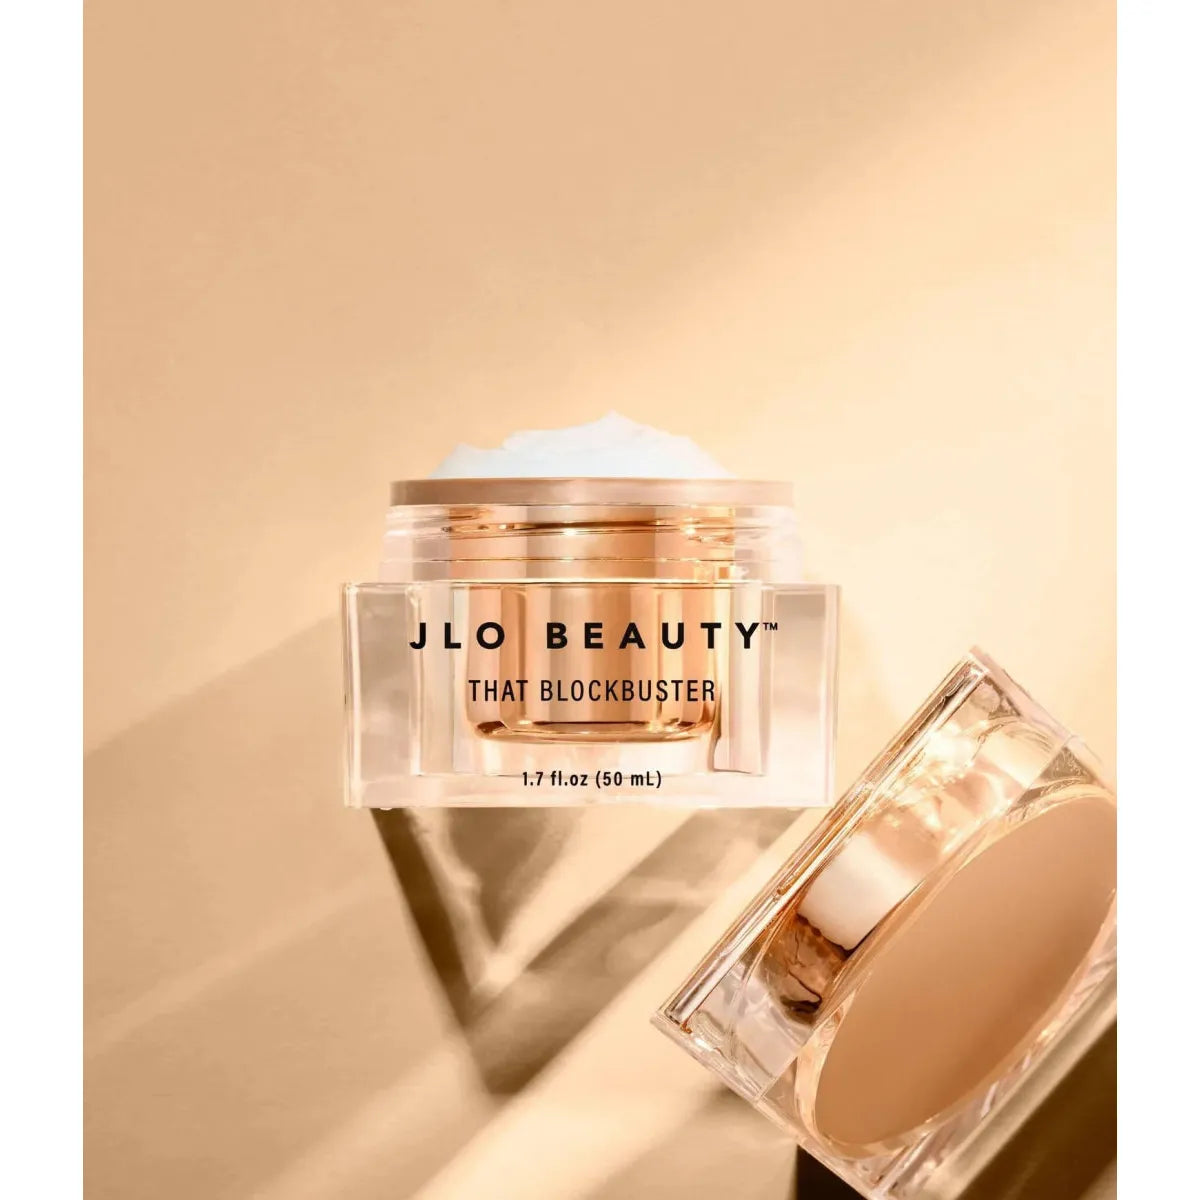 JLo Beauty THAT BLOCKBUSTER™ Hydrating Cream: Your Superstar Glow Revival - 50ml - DG International Ventures Limited